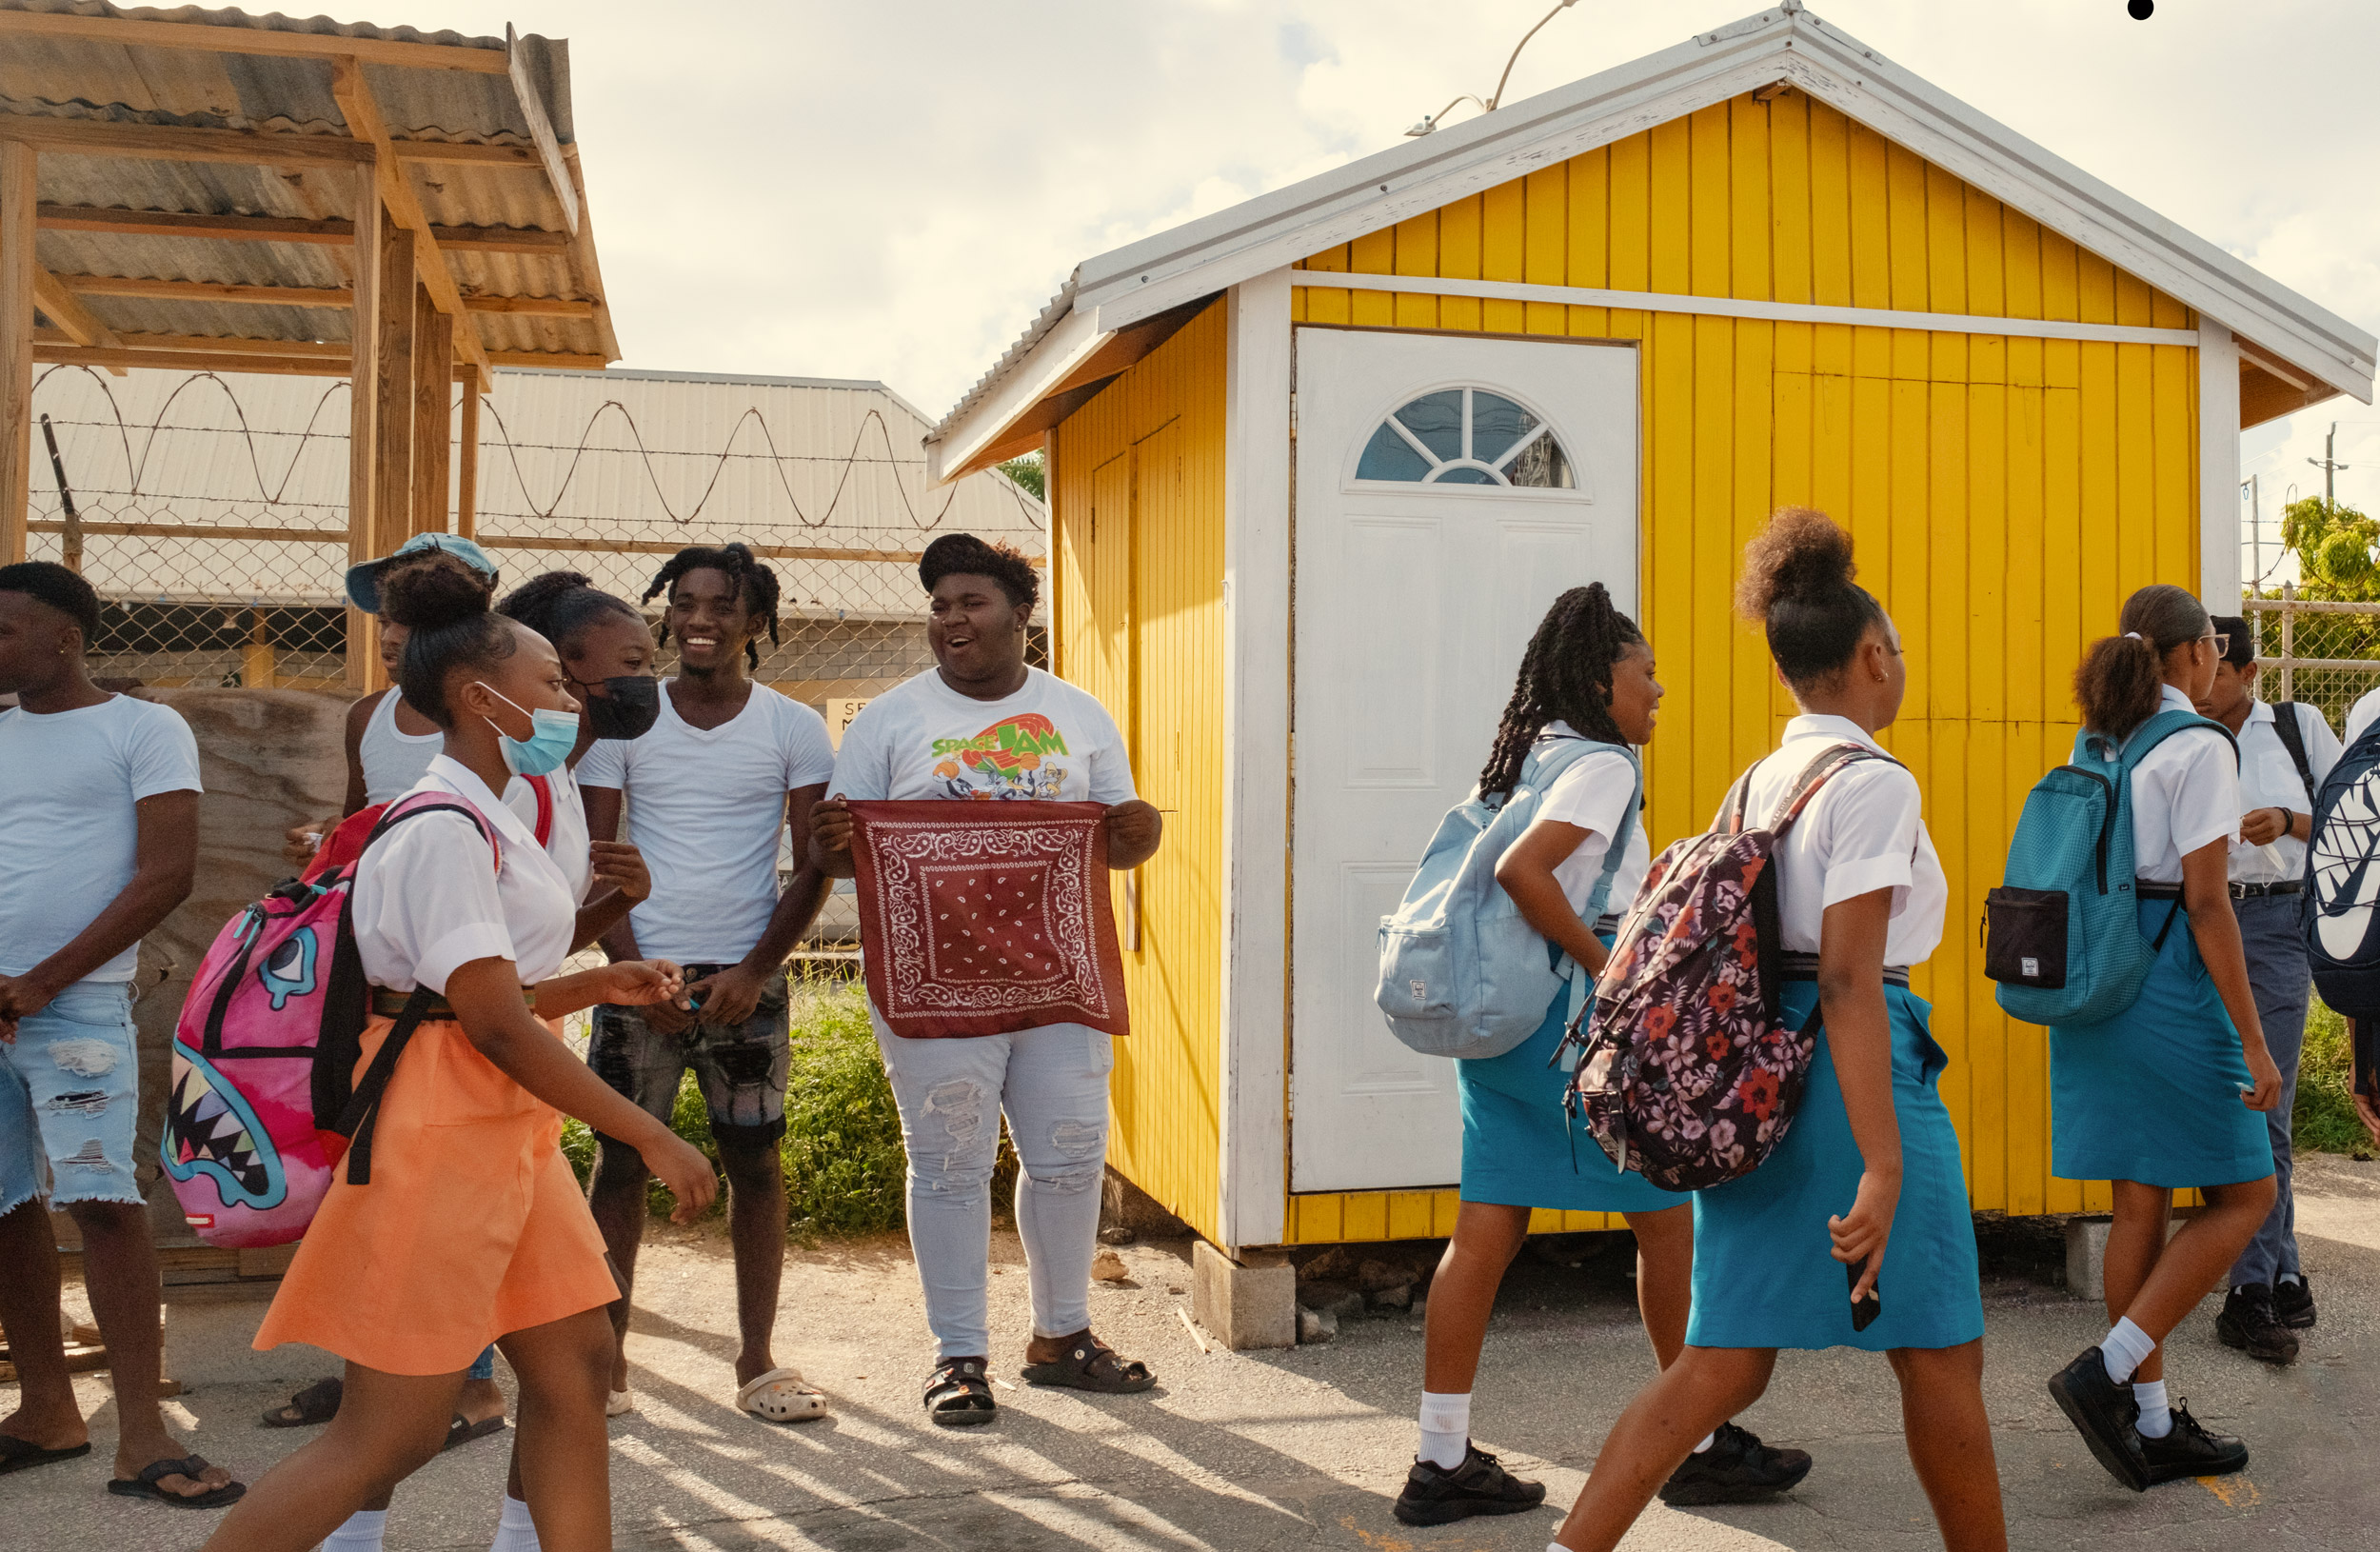 BOYS-AND-GIRLS-TEENAGERS-WALKING-BACK-FROM-SCHOOL-IN-BARBADOS-